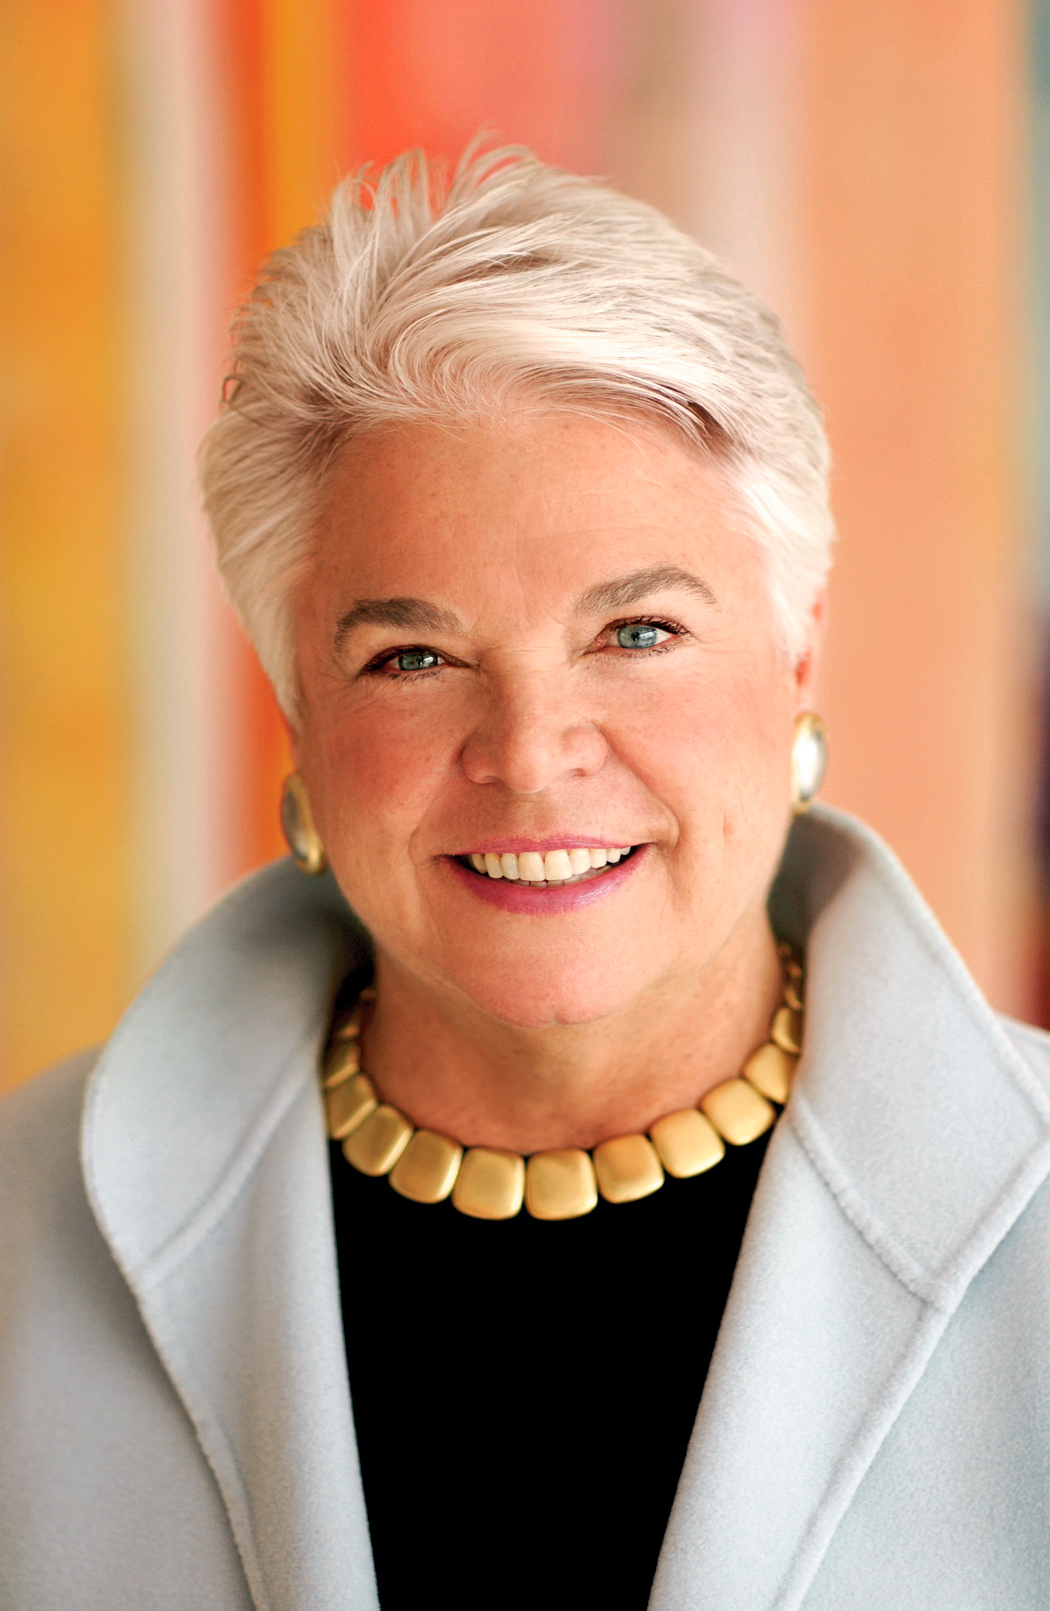 A recent portrait of entrepreneur and author Pleasant T. Rowland. Rowland smiles engagingly at the camera, while gold jewelry and a white jacket with popped color and dark blouse accentuates her bright white hair.